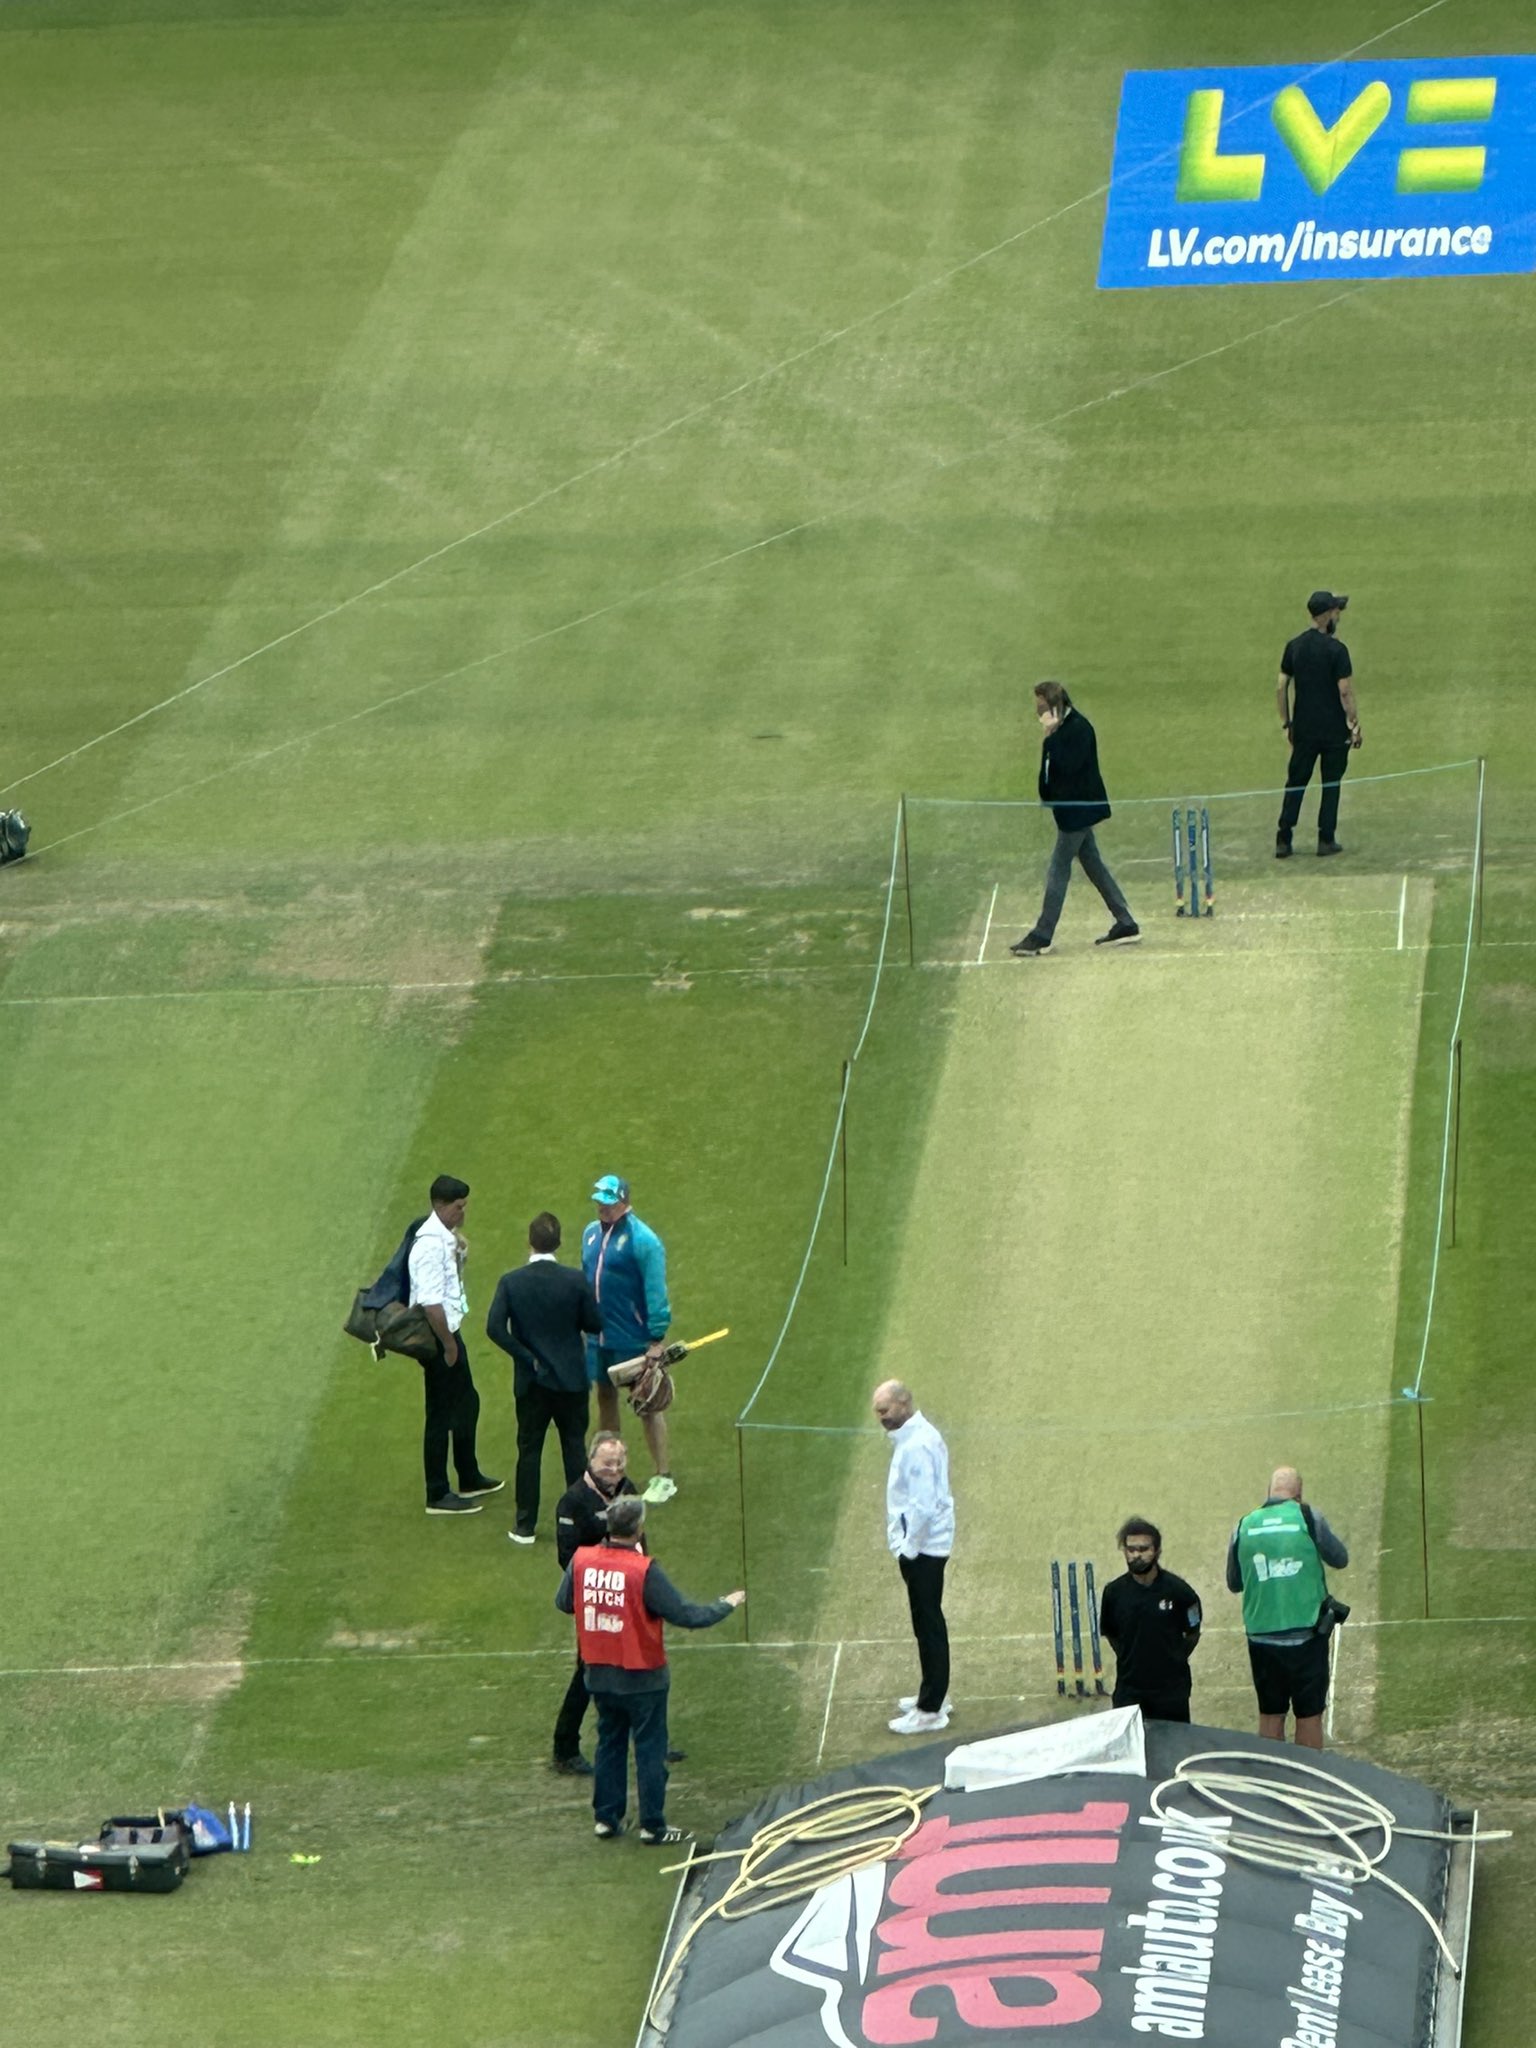 Bharat Sundaresan on X: Interesting reunion by the greenish pitch as Sir  Alastair Cook & Eoin Morgan catch up with their former coach Andy  Flower, now on Aussie garb #Ashes  /